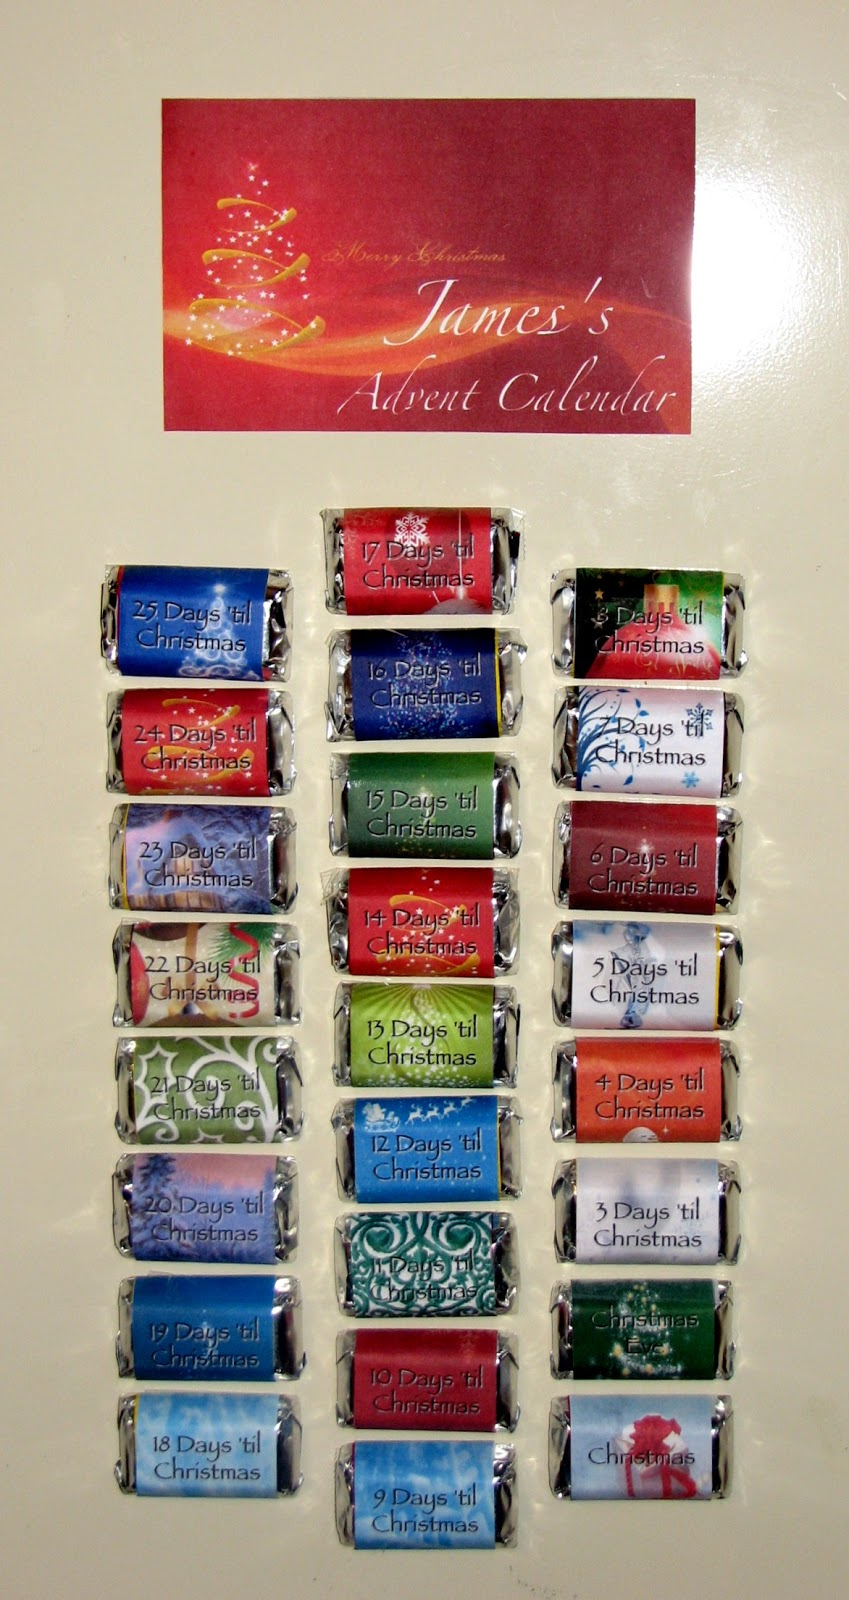 Everyday Handmade: Christmas Count Down Advent Calendars For Advent Calendars Do.you.count Up Or Down